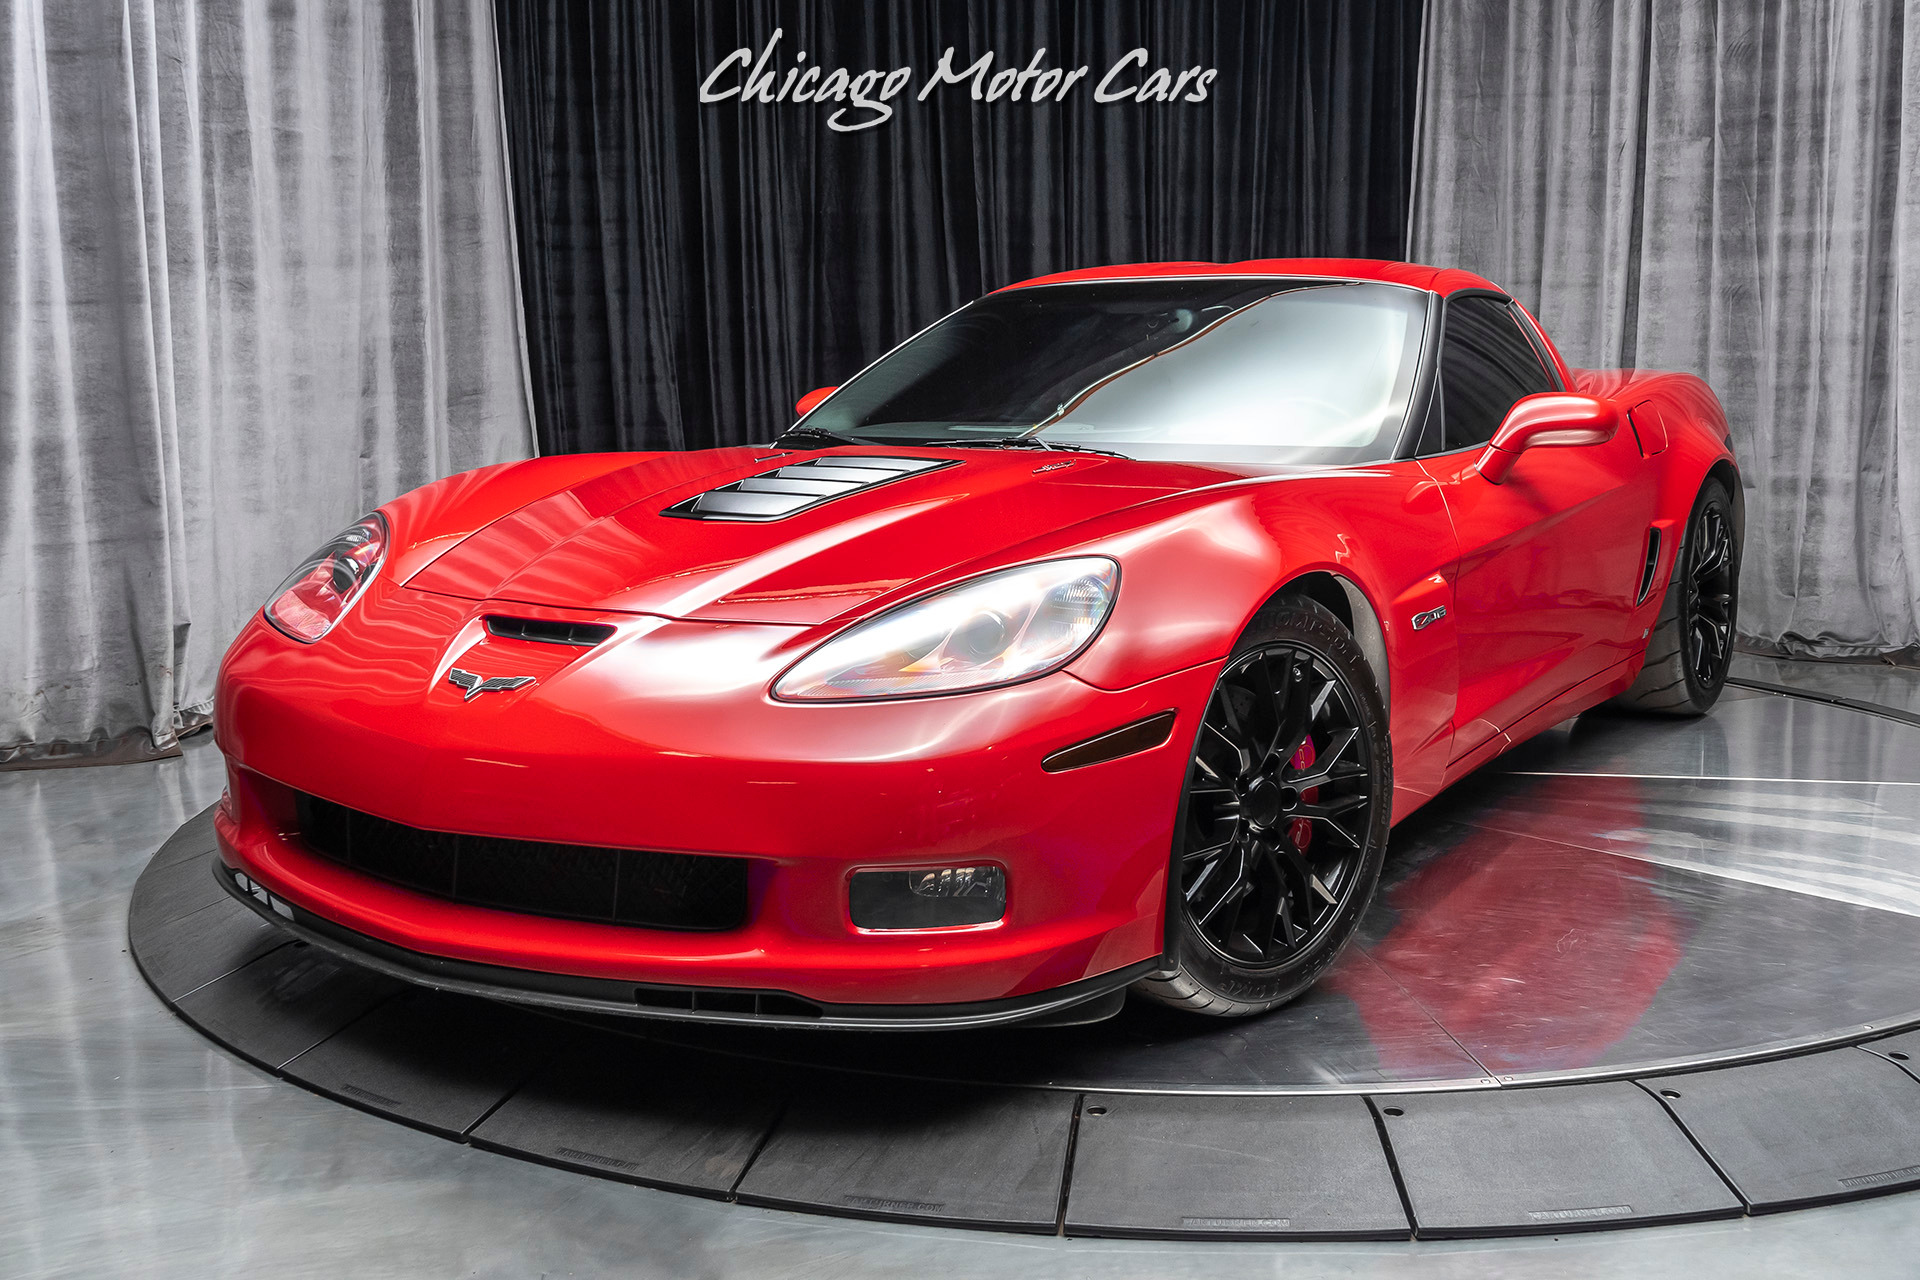 Used-2008-Chevrolet-Corvette-Z06-ONLY-16K-MILES---SUPERCHARGED-800HP-TUNED-BY-SPEED-INC